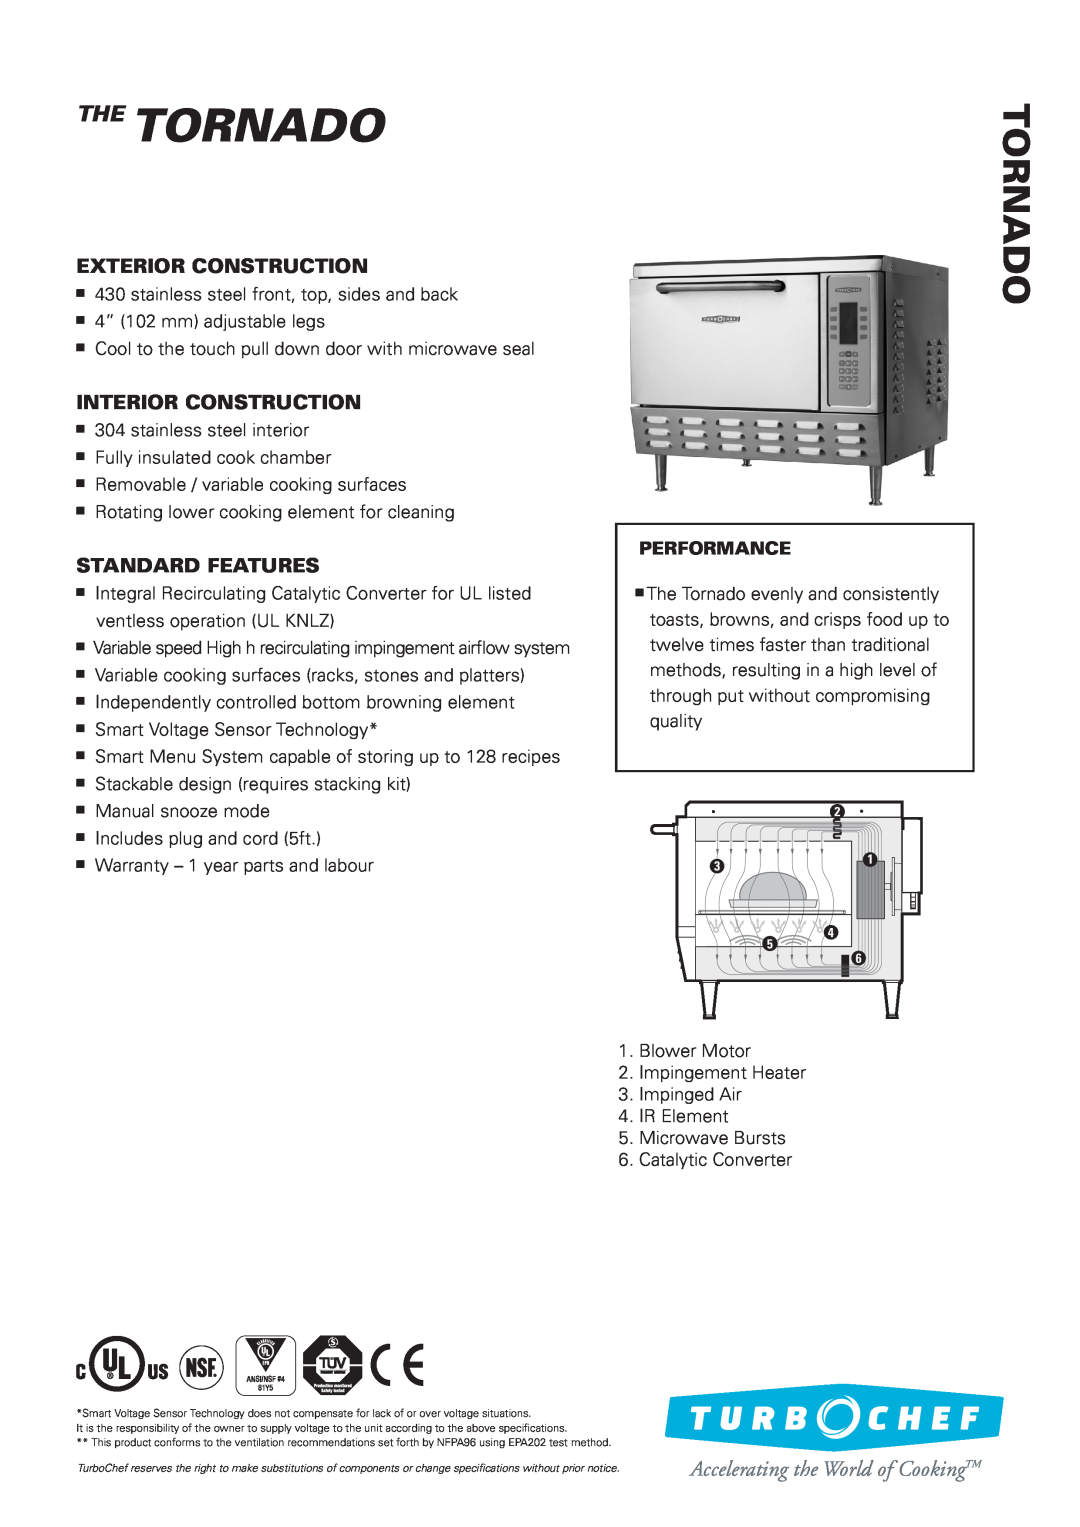 Moffat Microwave Oven warranty The TORNADO, Tornado, Exterior Construction, Interior Construction, Standard Features 